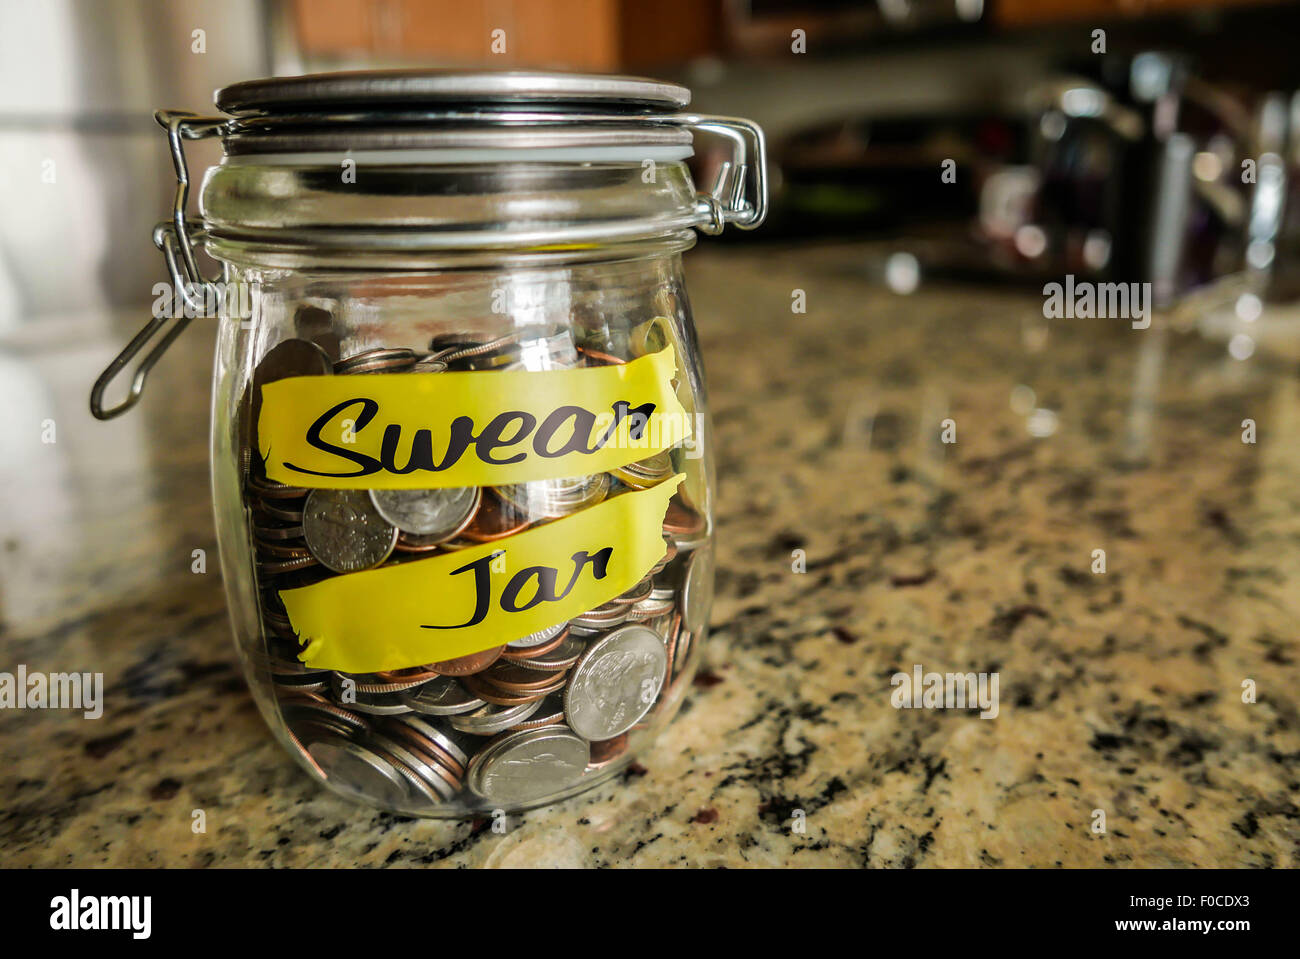 Swear Jar High Resolution Stock Photography and Images - Alamy